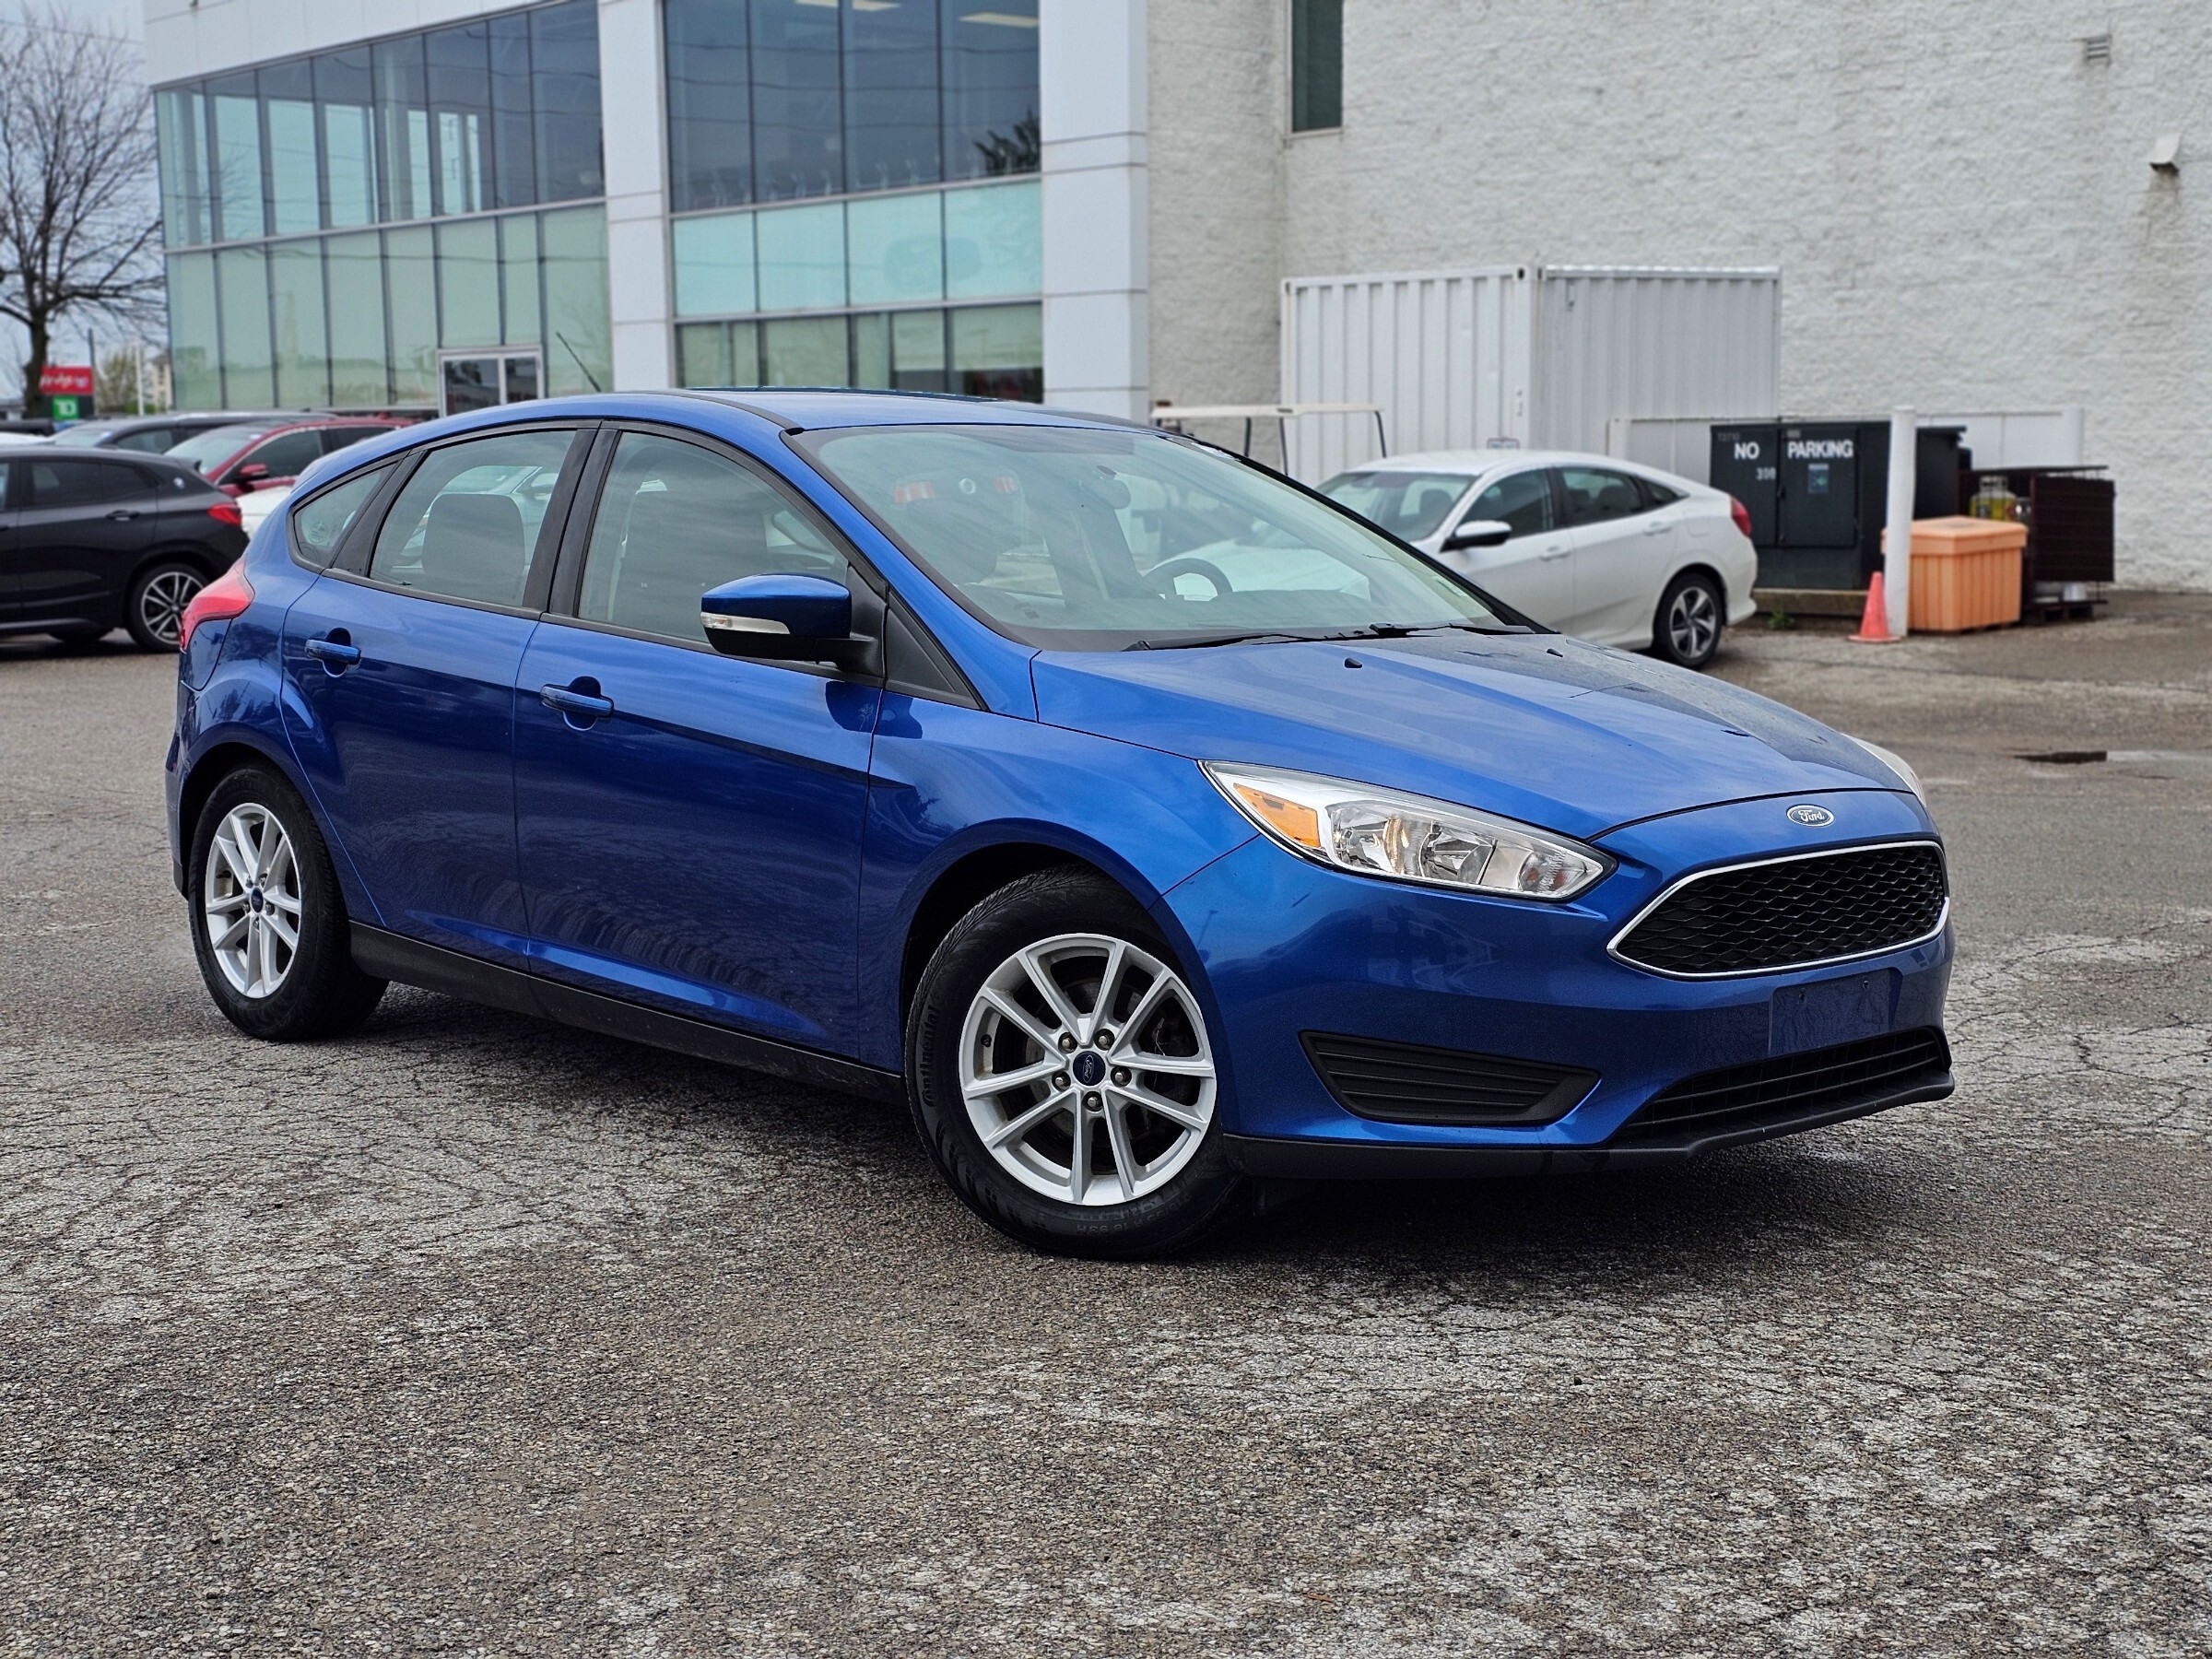 2018 Ford Focus SE 2.0L 4 CYL | 6-SPEED AUTO TRANSMISSION | HEATED